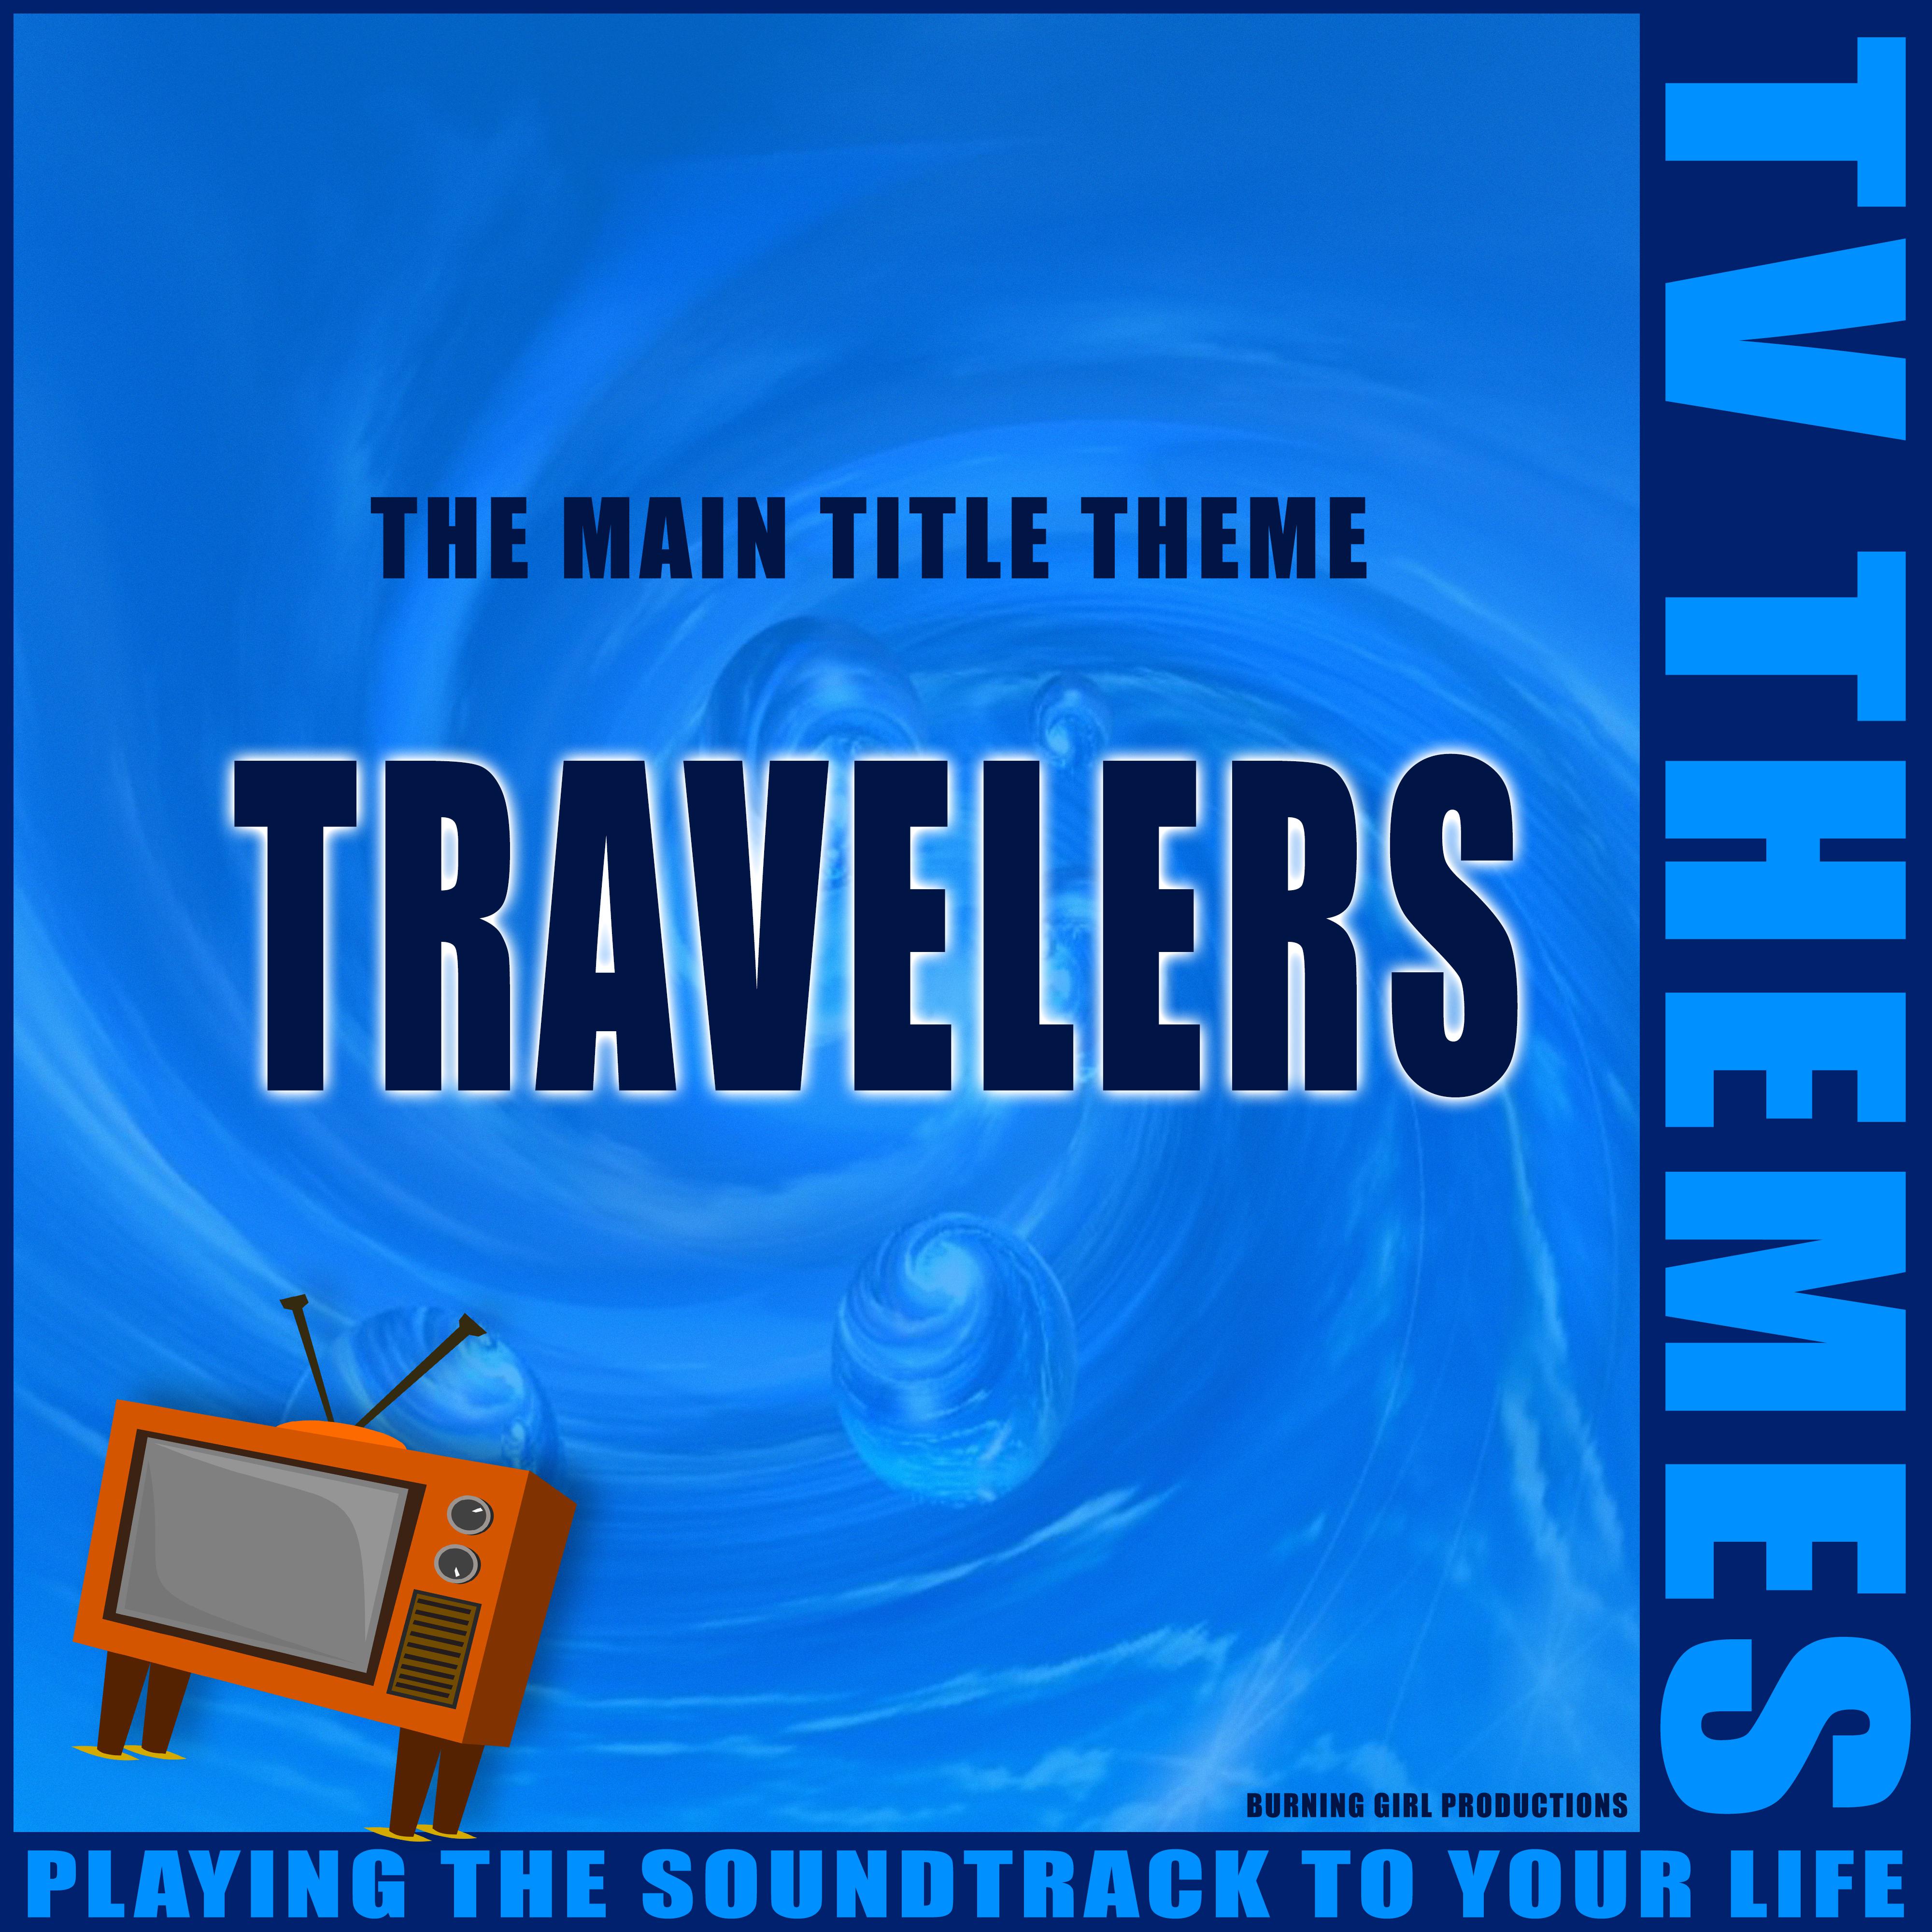 Travelers - The Main Title Theme